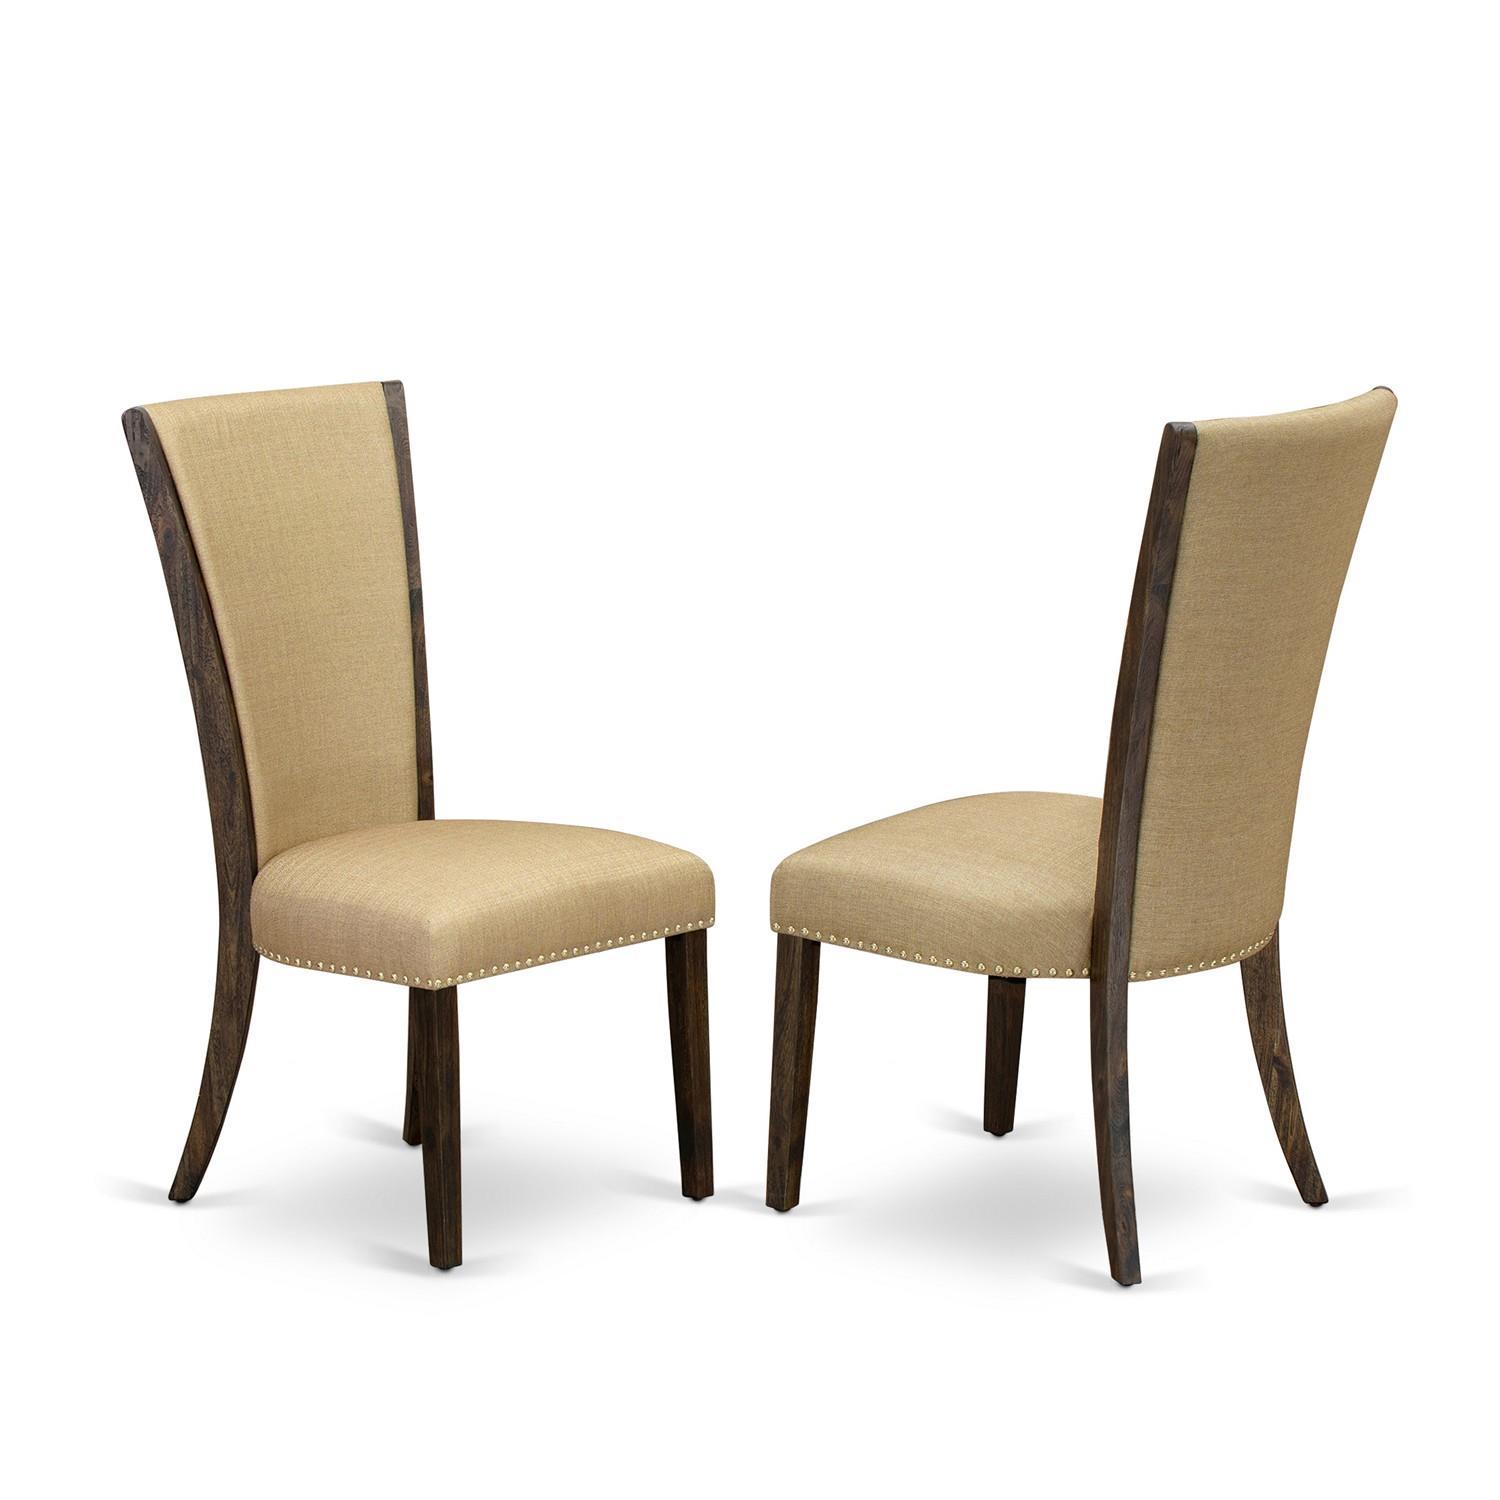 East West Furniture Verona Wood Set Of 2 Parson Chair With Jacobean VEP7T03